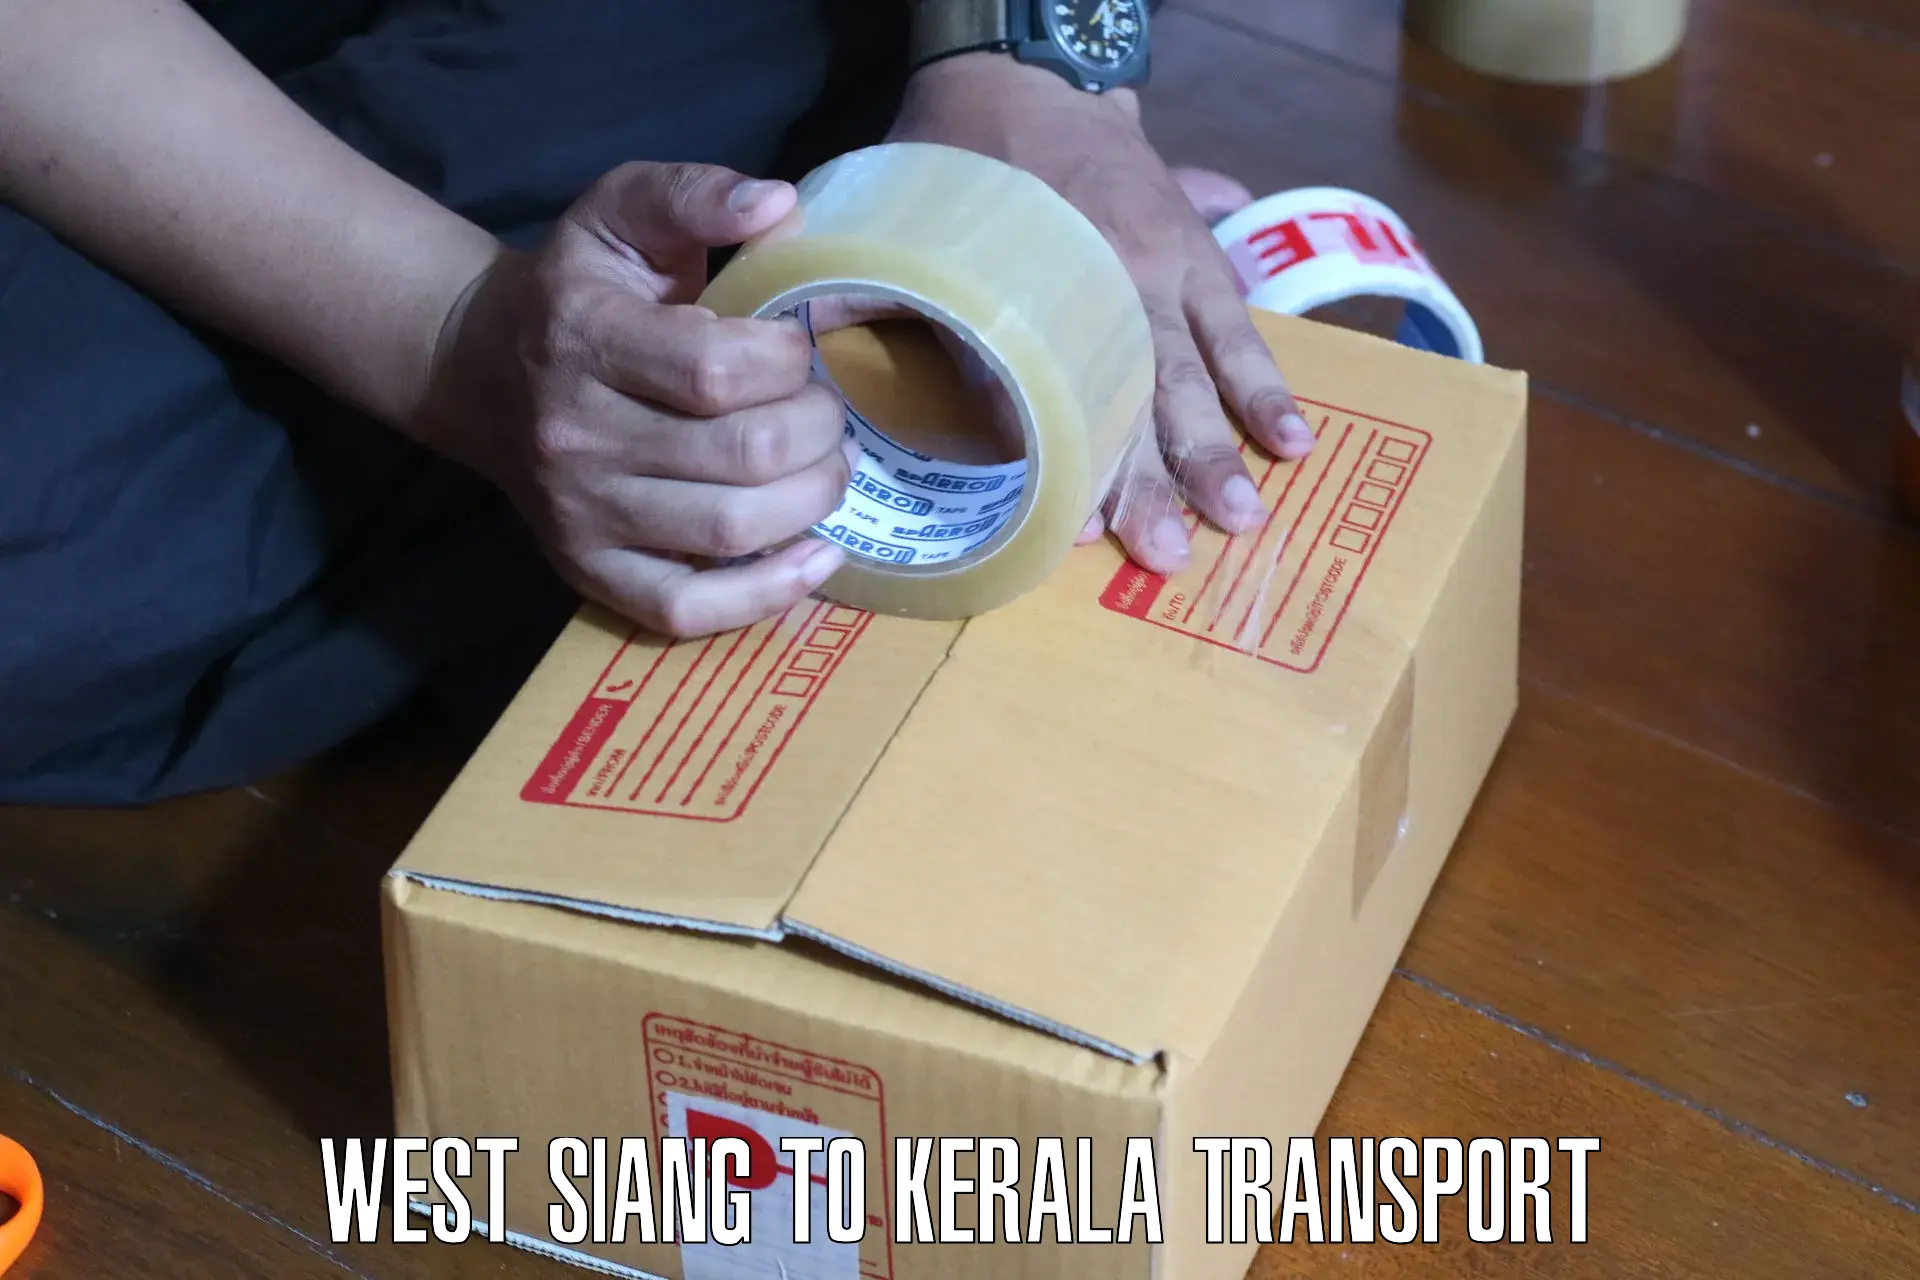 Truck transport companies in India in West Siang to Thiruvananthapuram